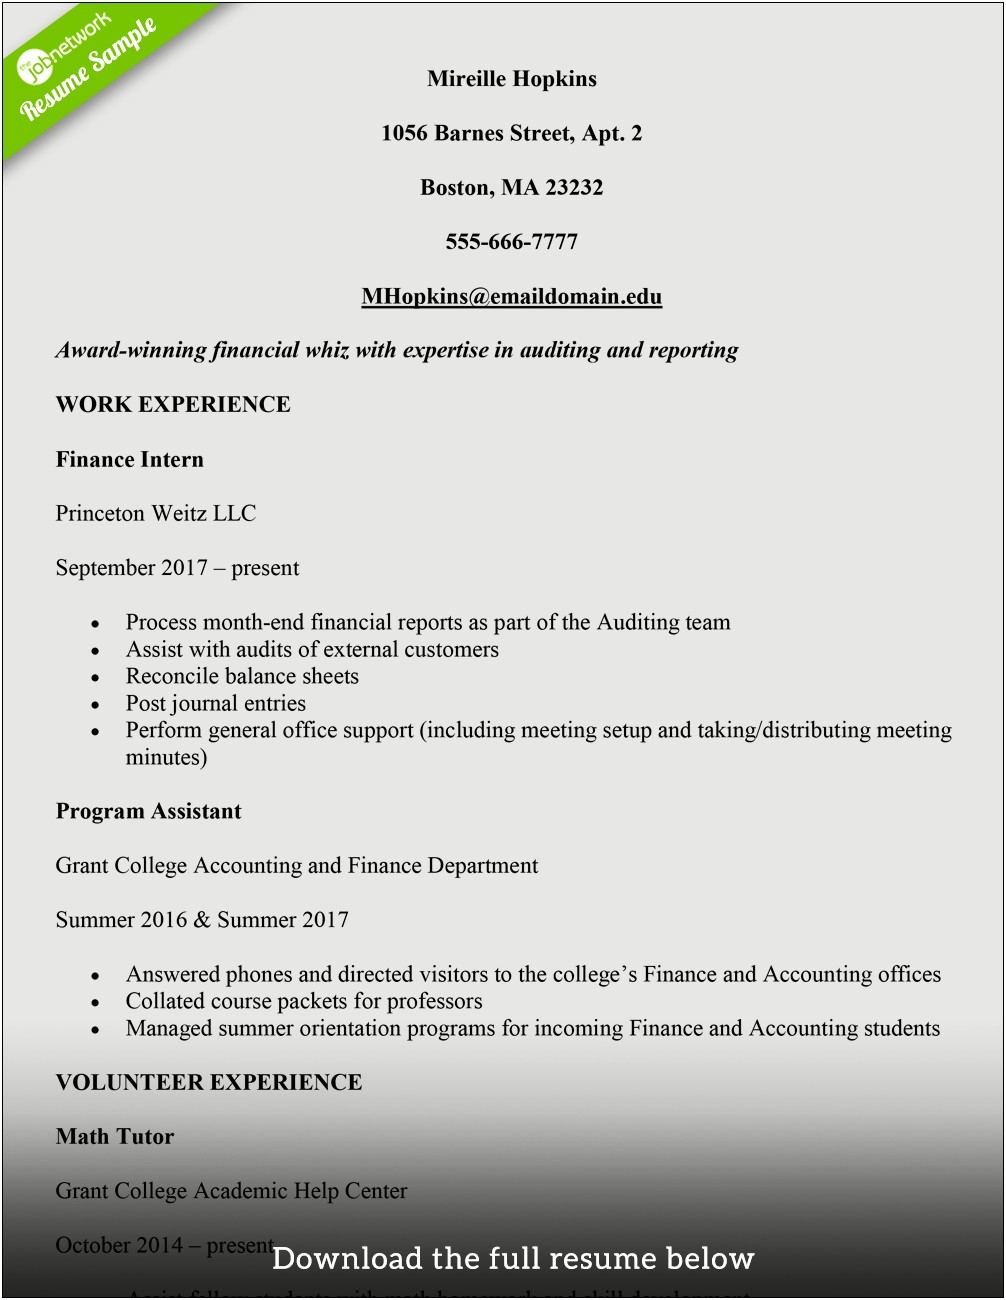 Resume Objective For College Student Summer Job